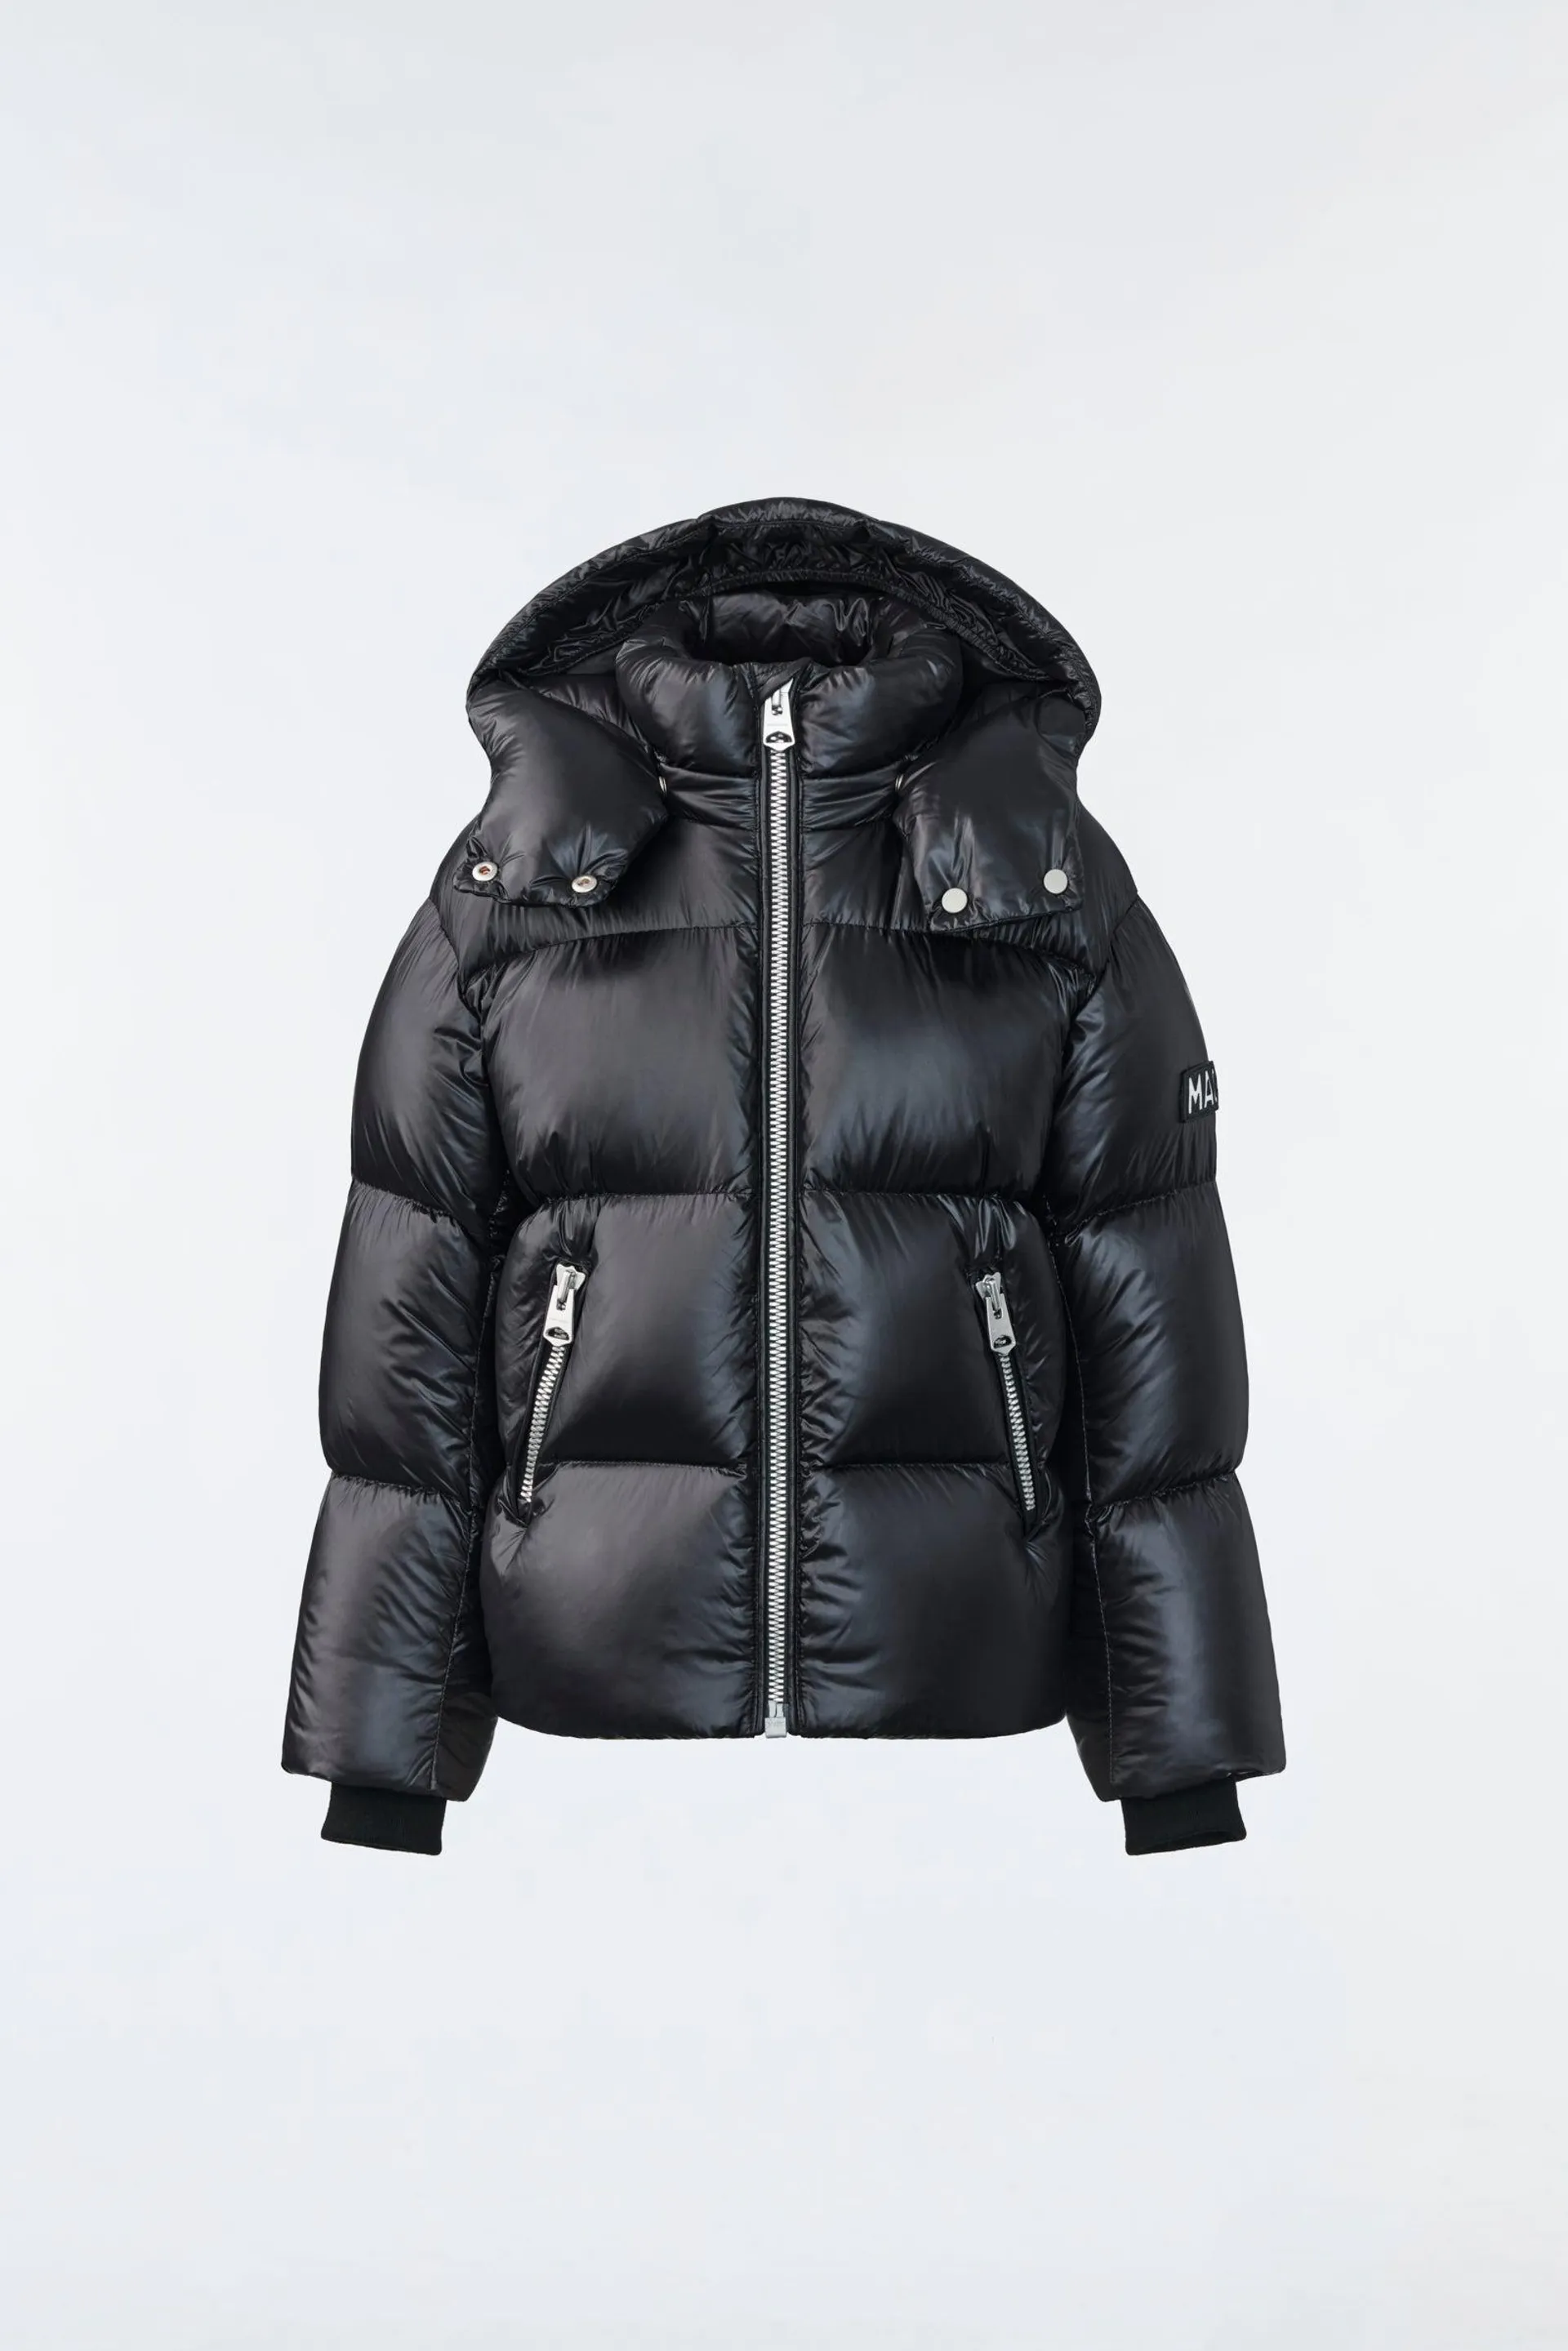 JESSE Lustrous light down jacket for toddlers (2-6 years)